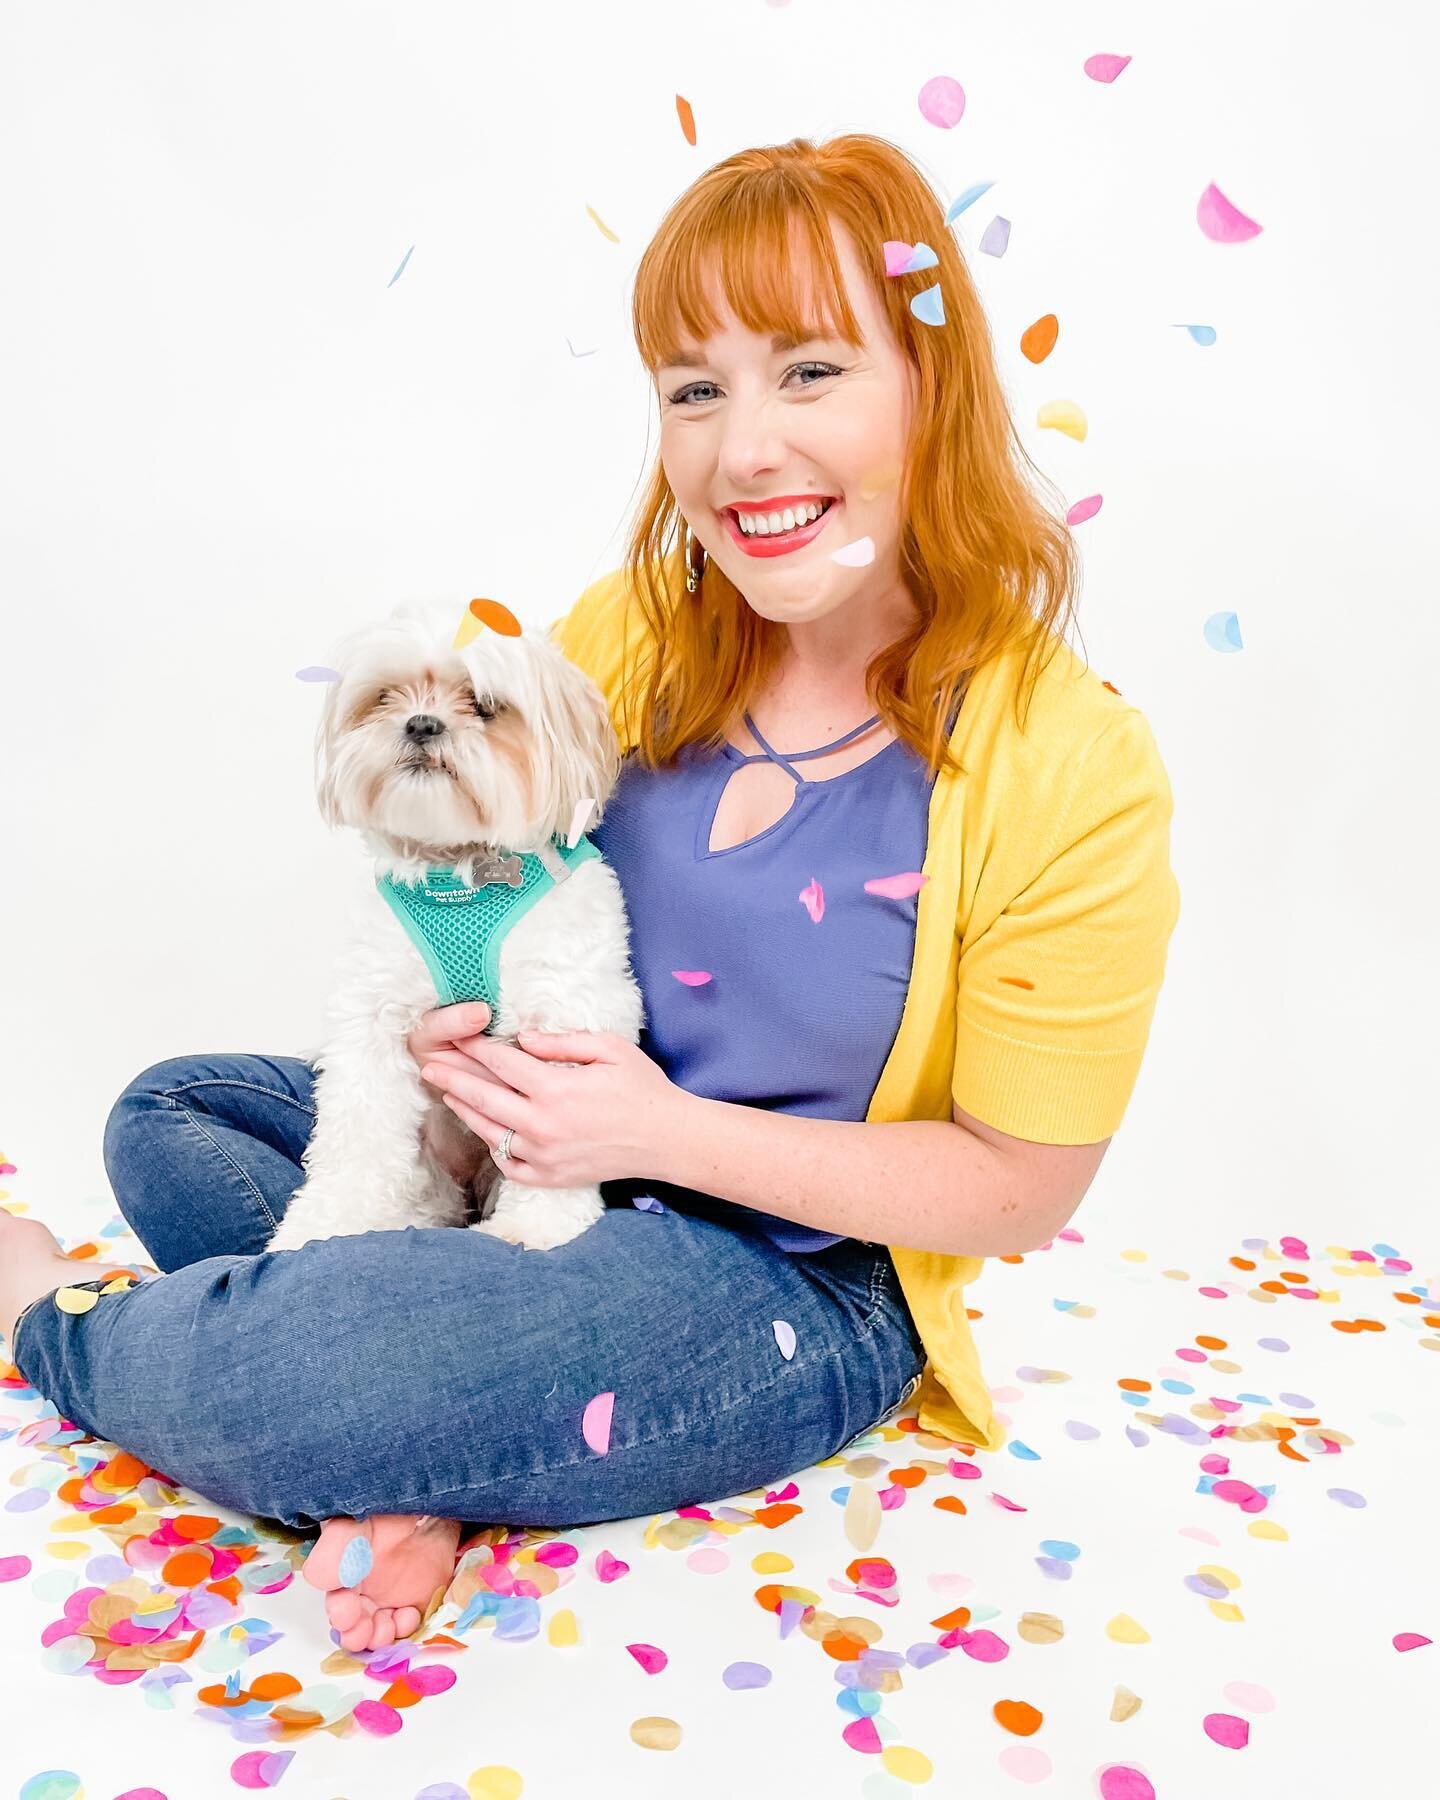 Hey, you! 🥳 It&rsquo;s my bday weekend and Mabel and I want to celebrate with you! 
⠀⠀⠀⠀⠀⠀⠀⠀⠀
So I&rsquo;m sharing the love with 25% off my Instagram Course for Realtors - IG Unlocked for Real Estate - this weekend only! 
⠀⠀⠀⠀⠀⠀⠀⠀⠀
Inside IG Unlocke